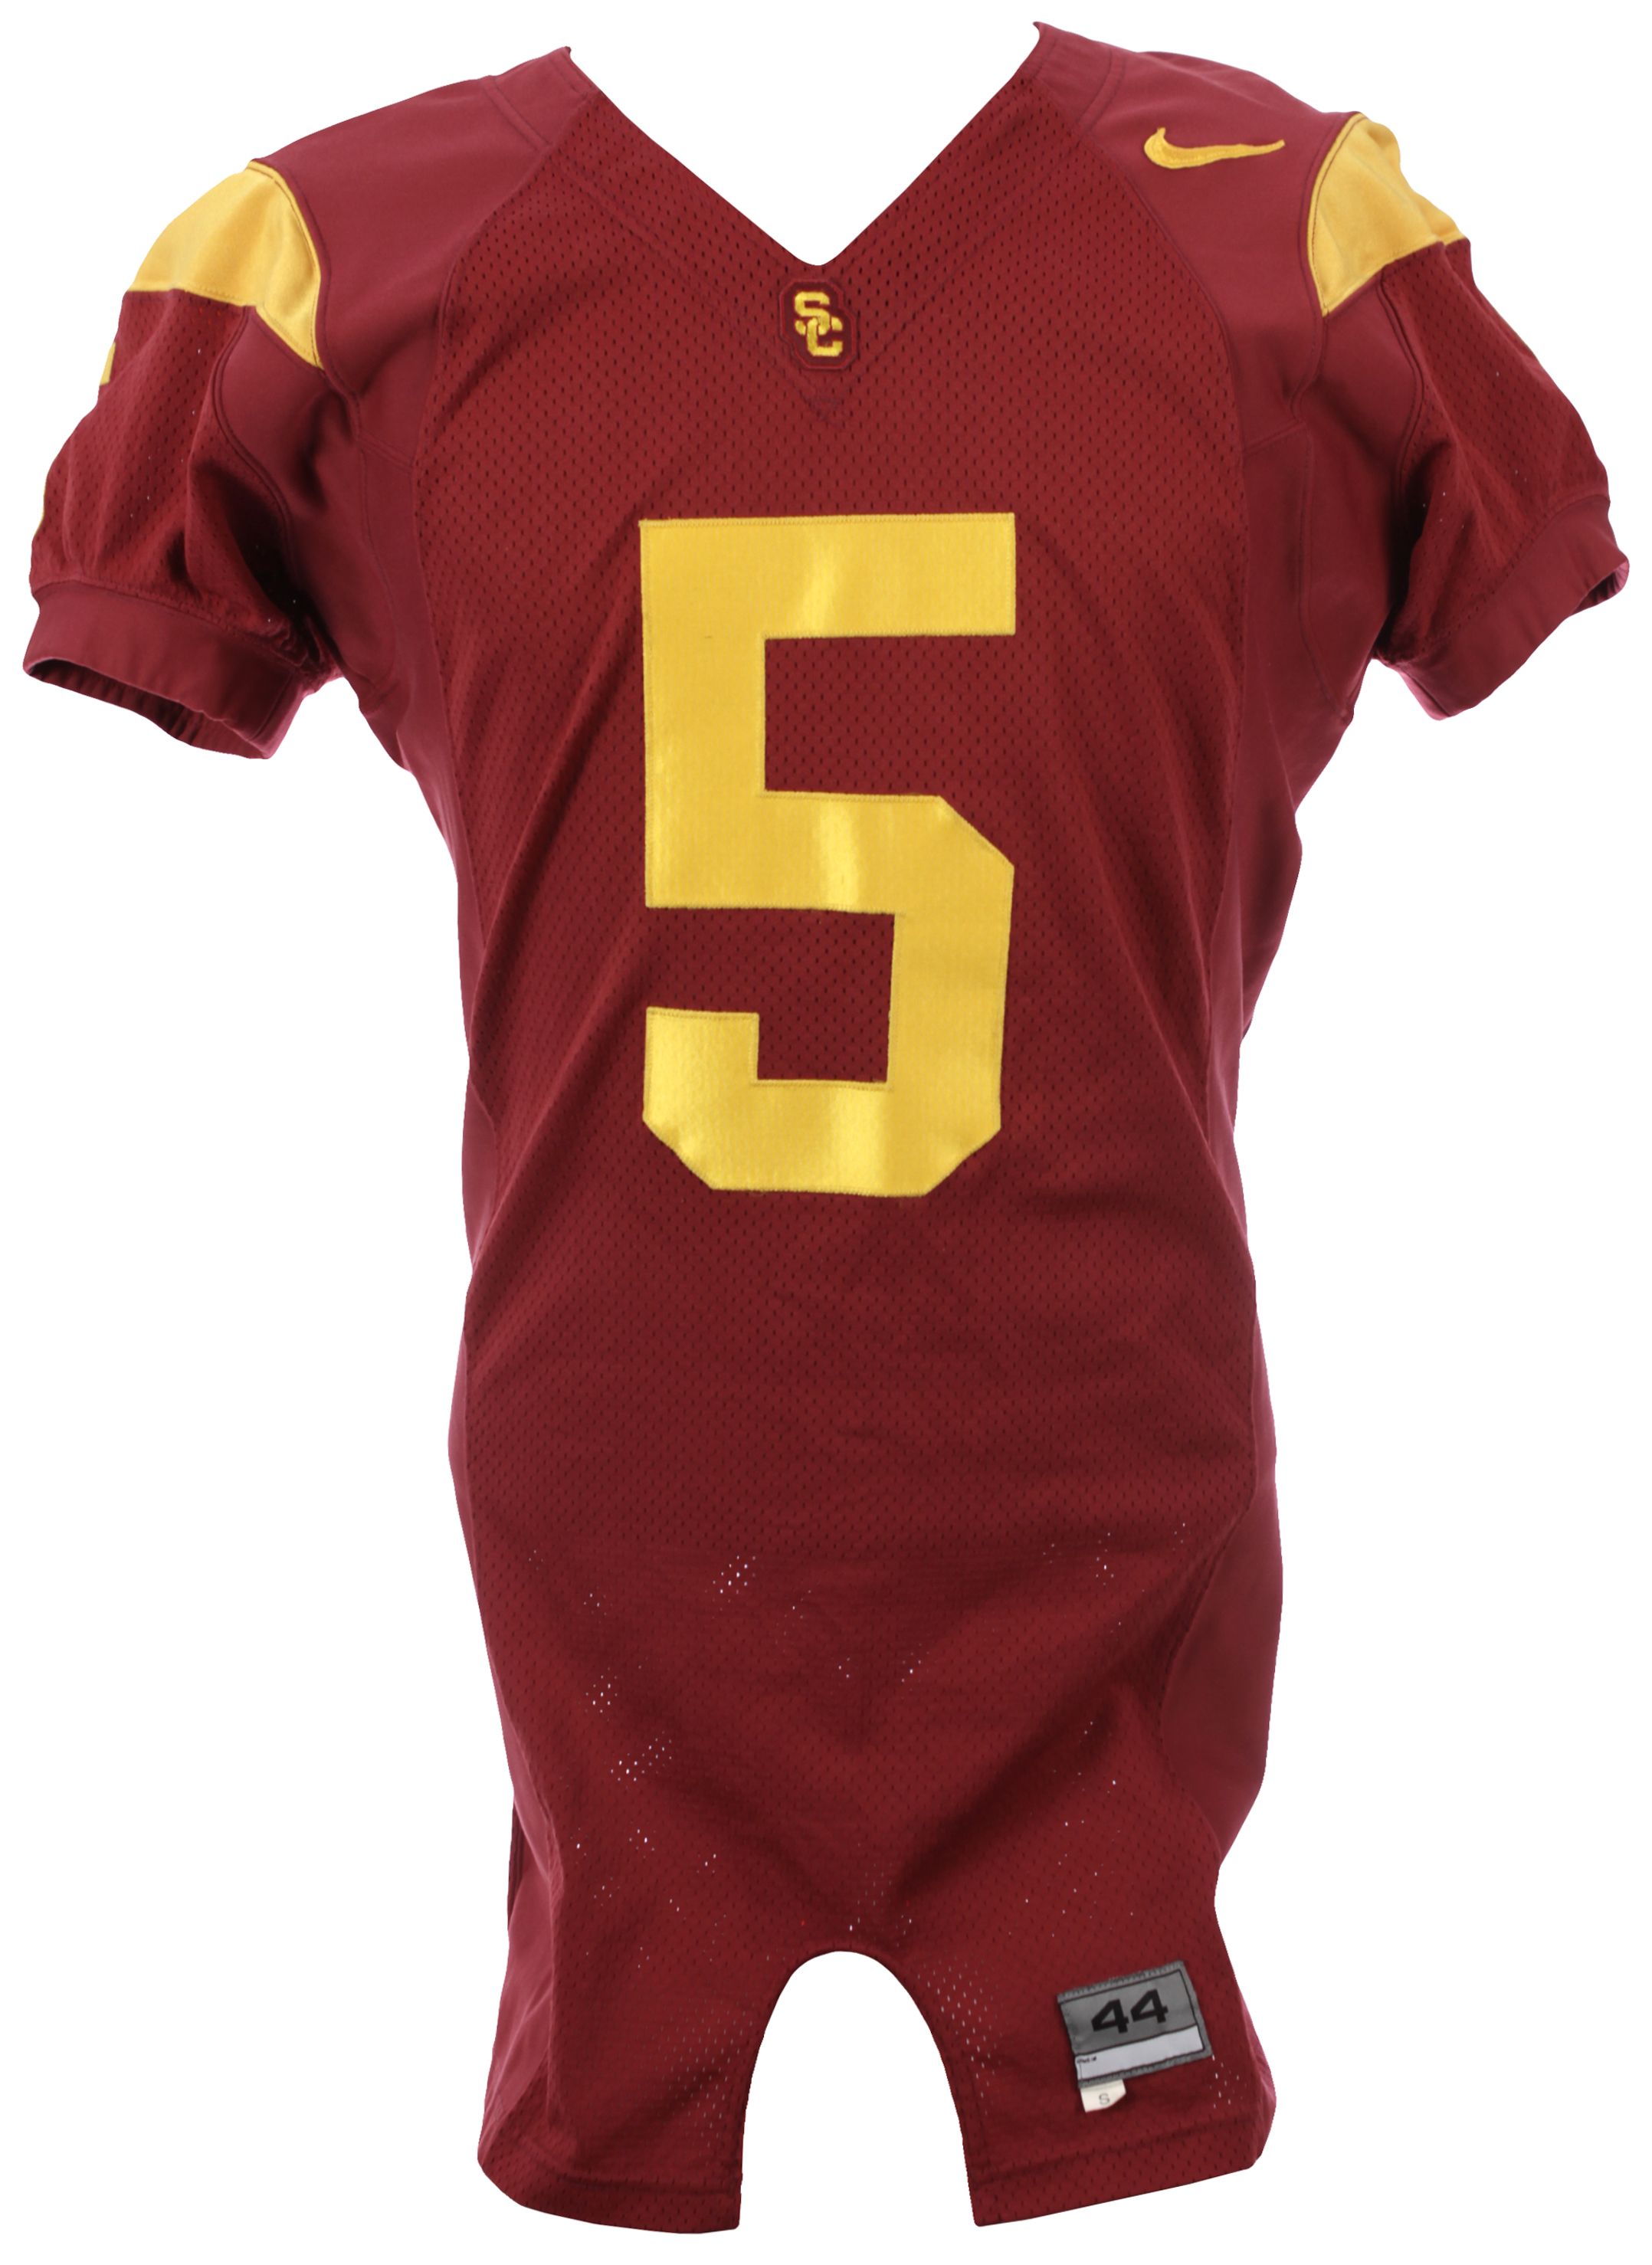 usc home jersey